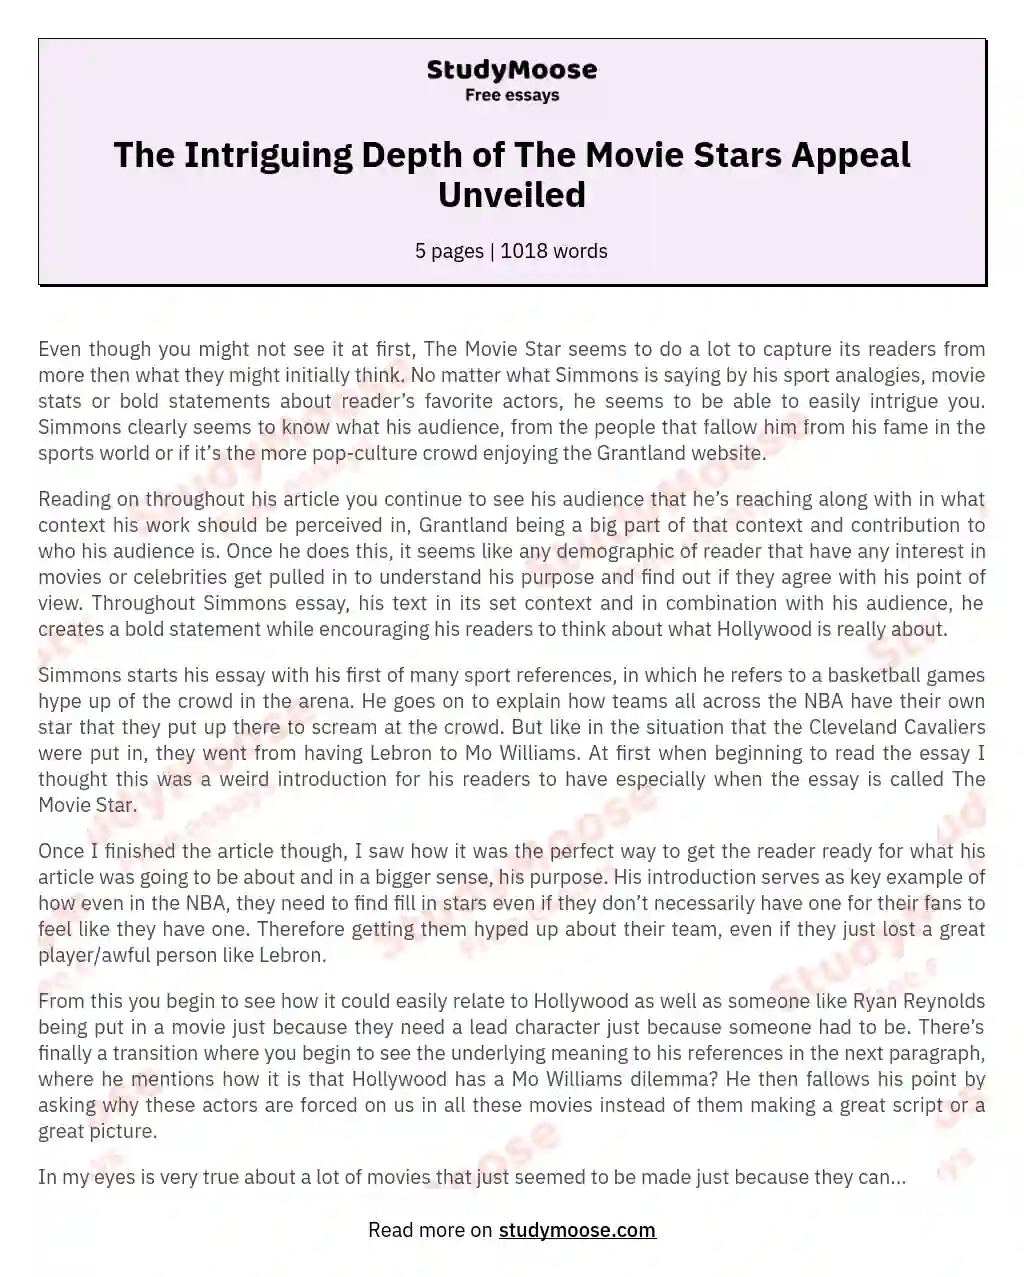 The Intriguing Depth of The Movie Stars Appeal Unveiled essay